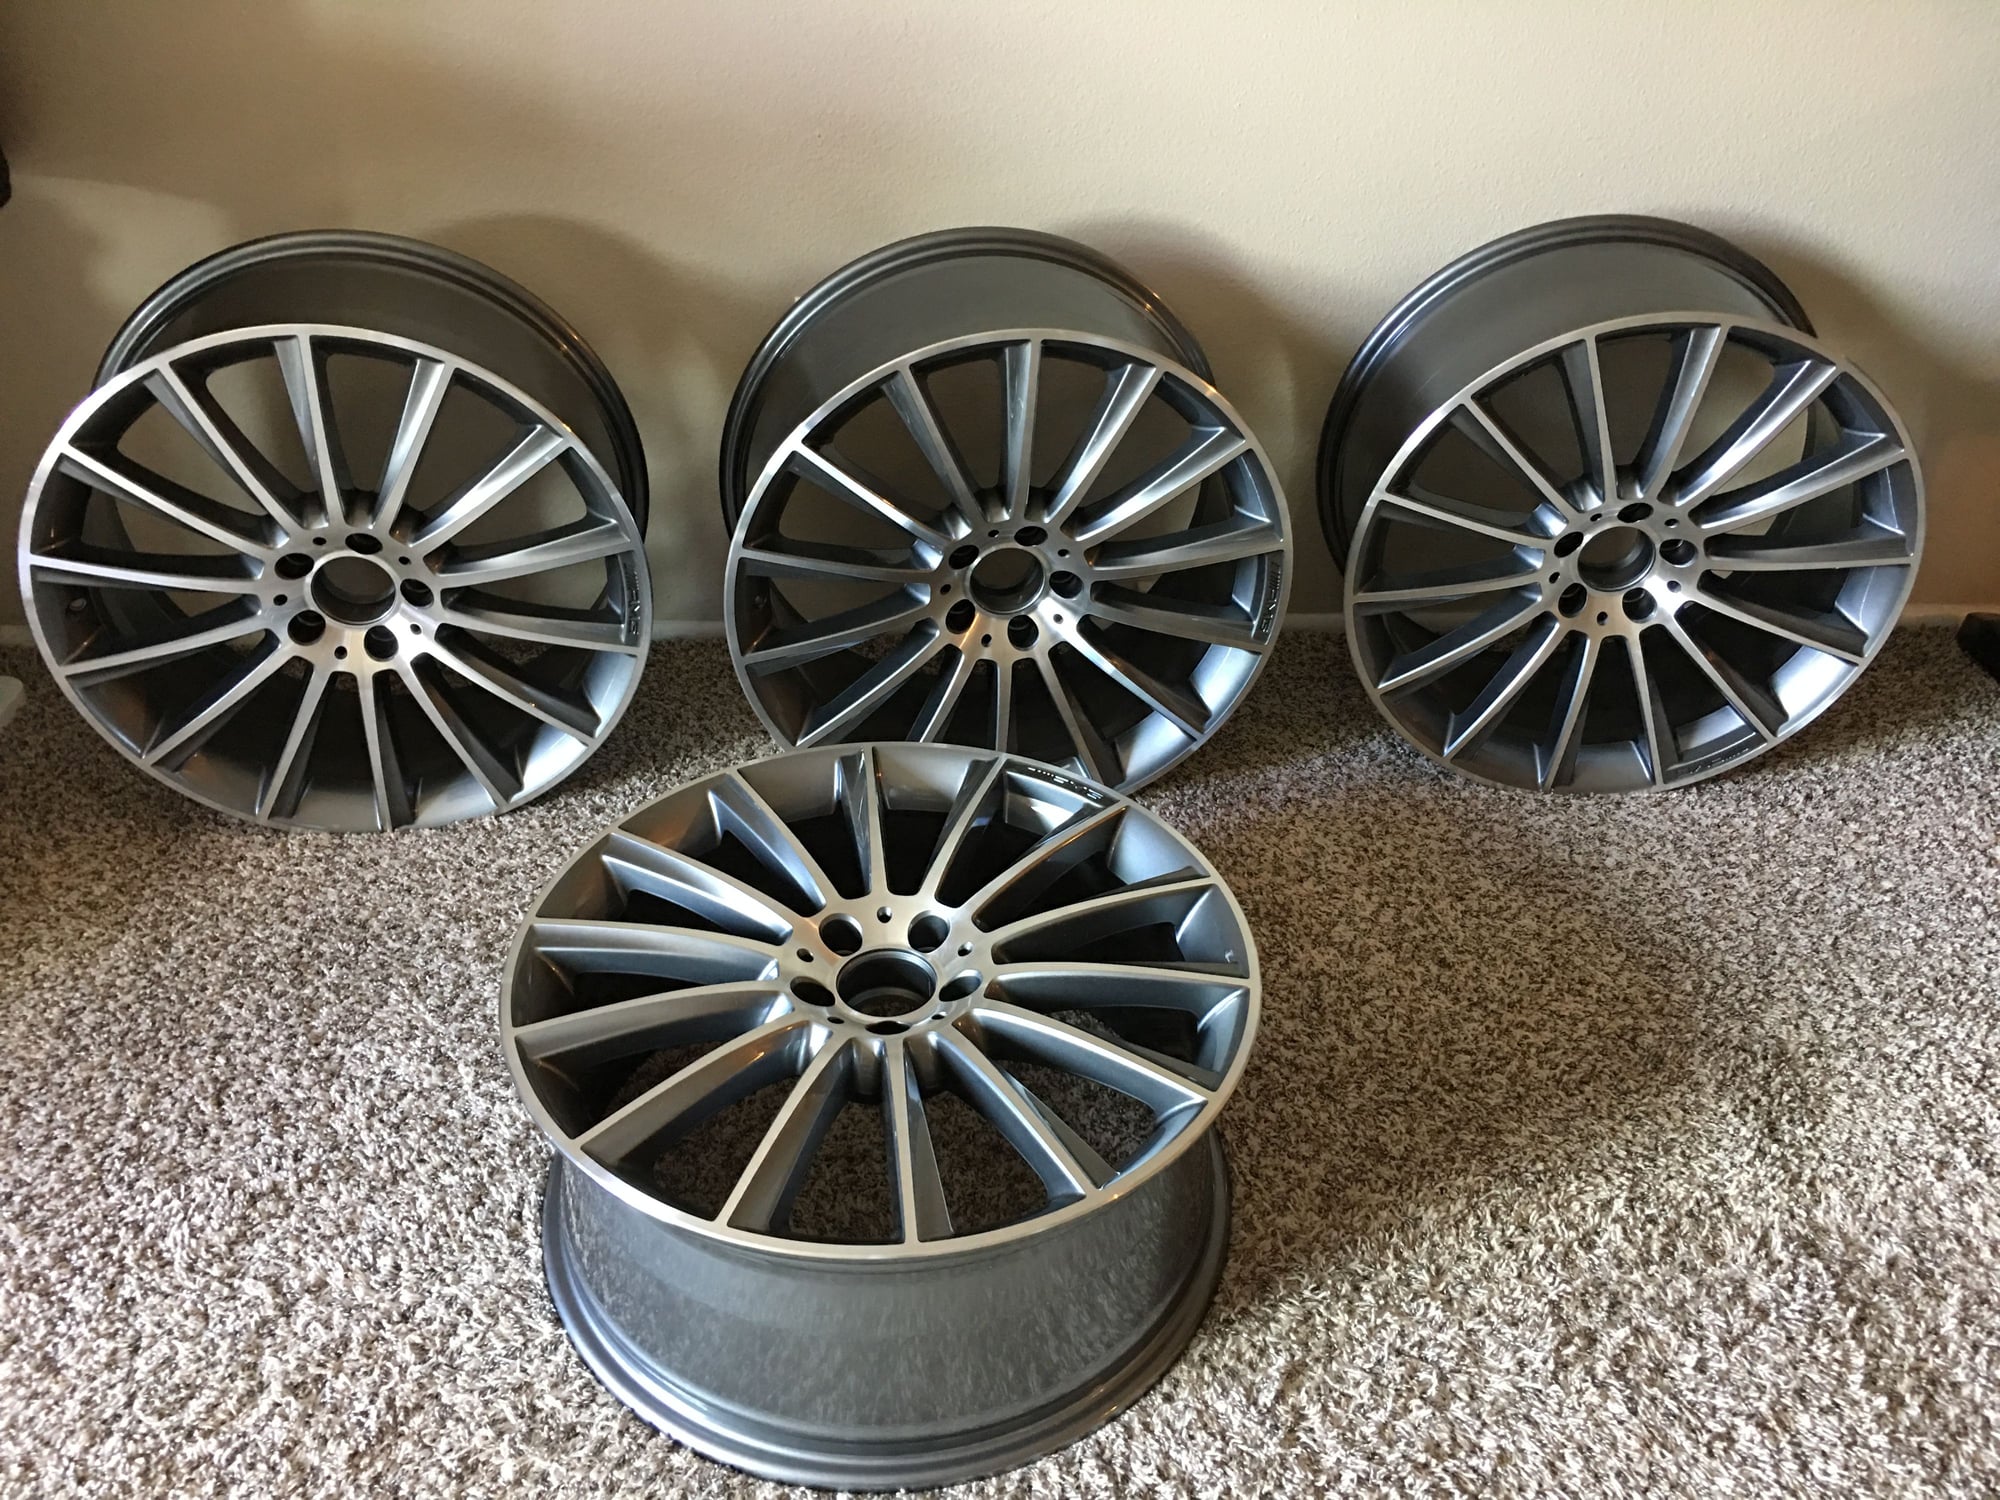 Wheels and Tires/Axles - 20" Mercedes Multi-Spoke AMG wheels - Used - 2013 to 2019 Mercedes-Benz S450 - Los Angeles, CA 91801, United States